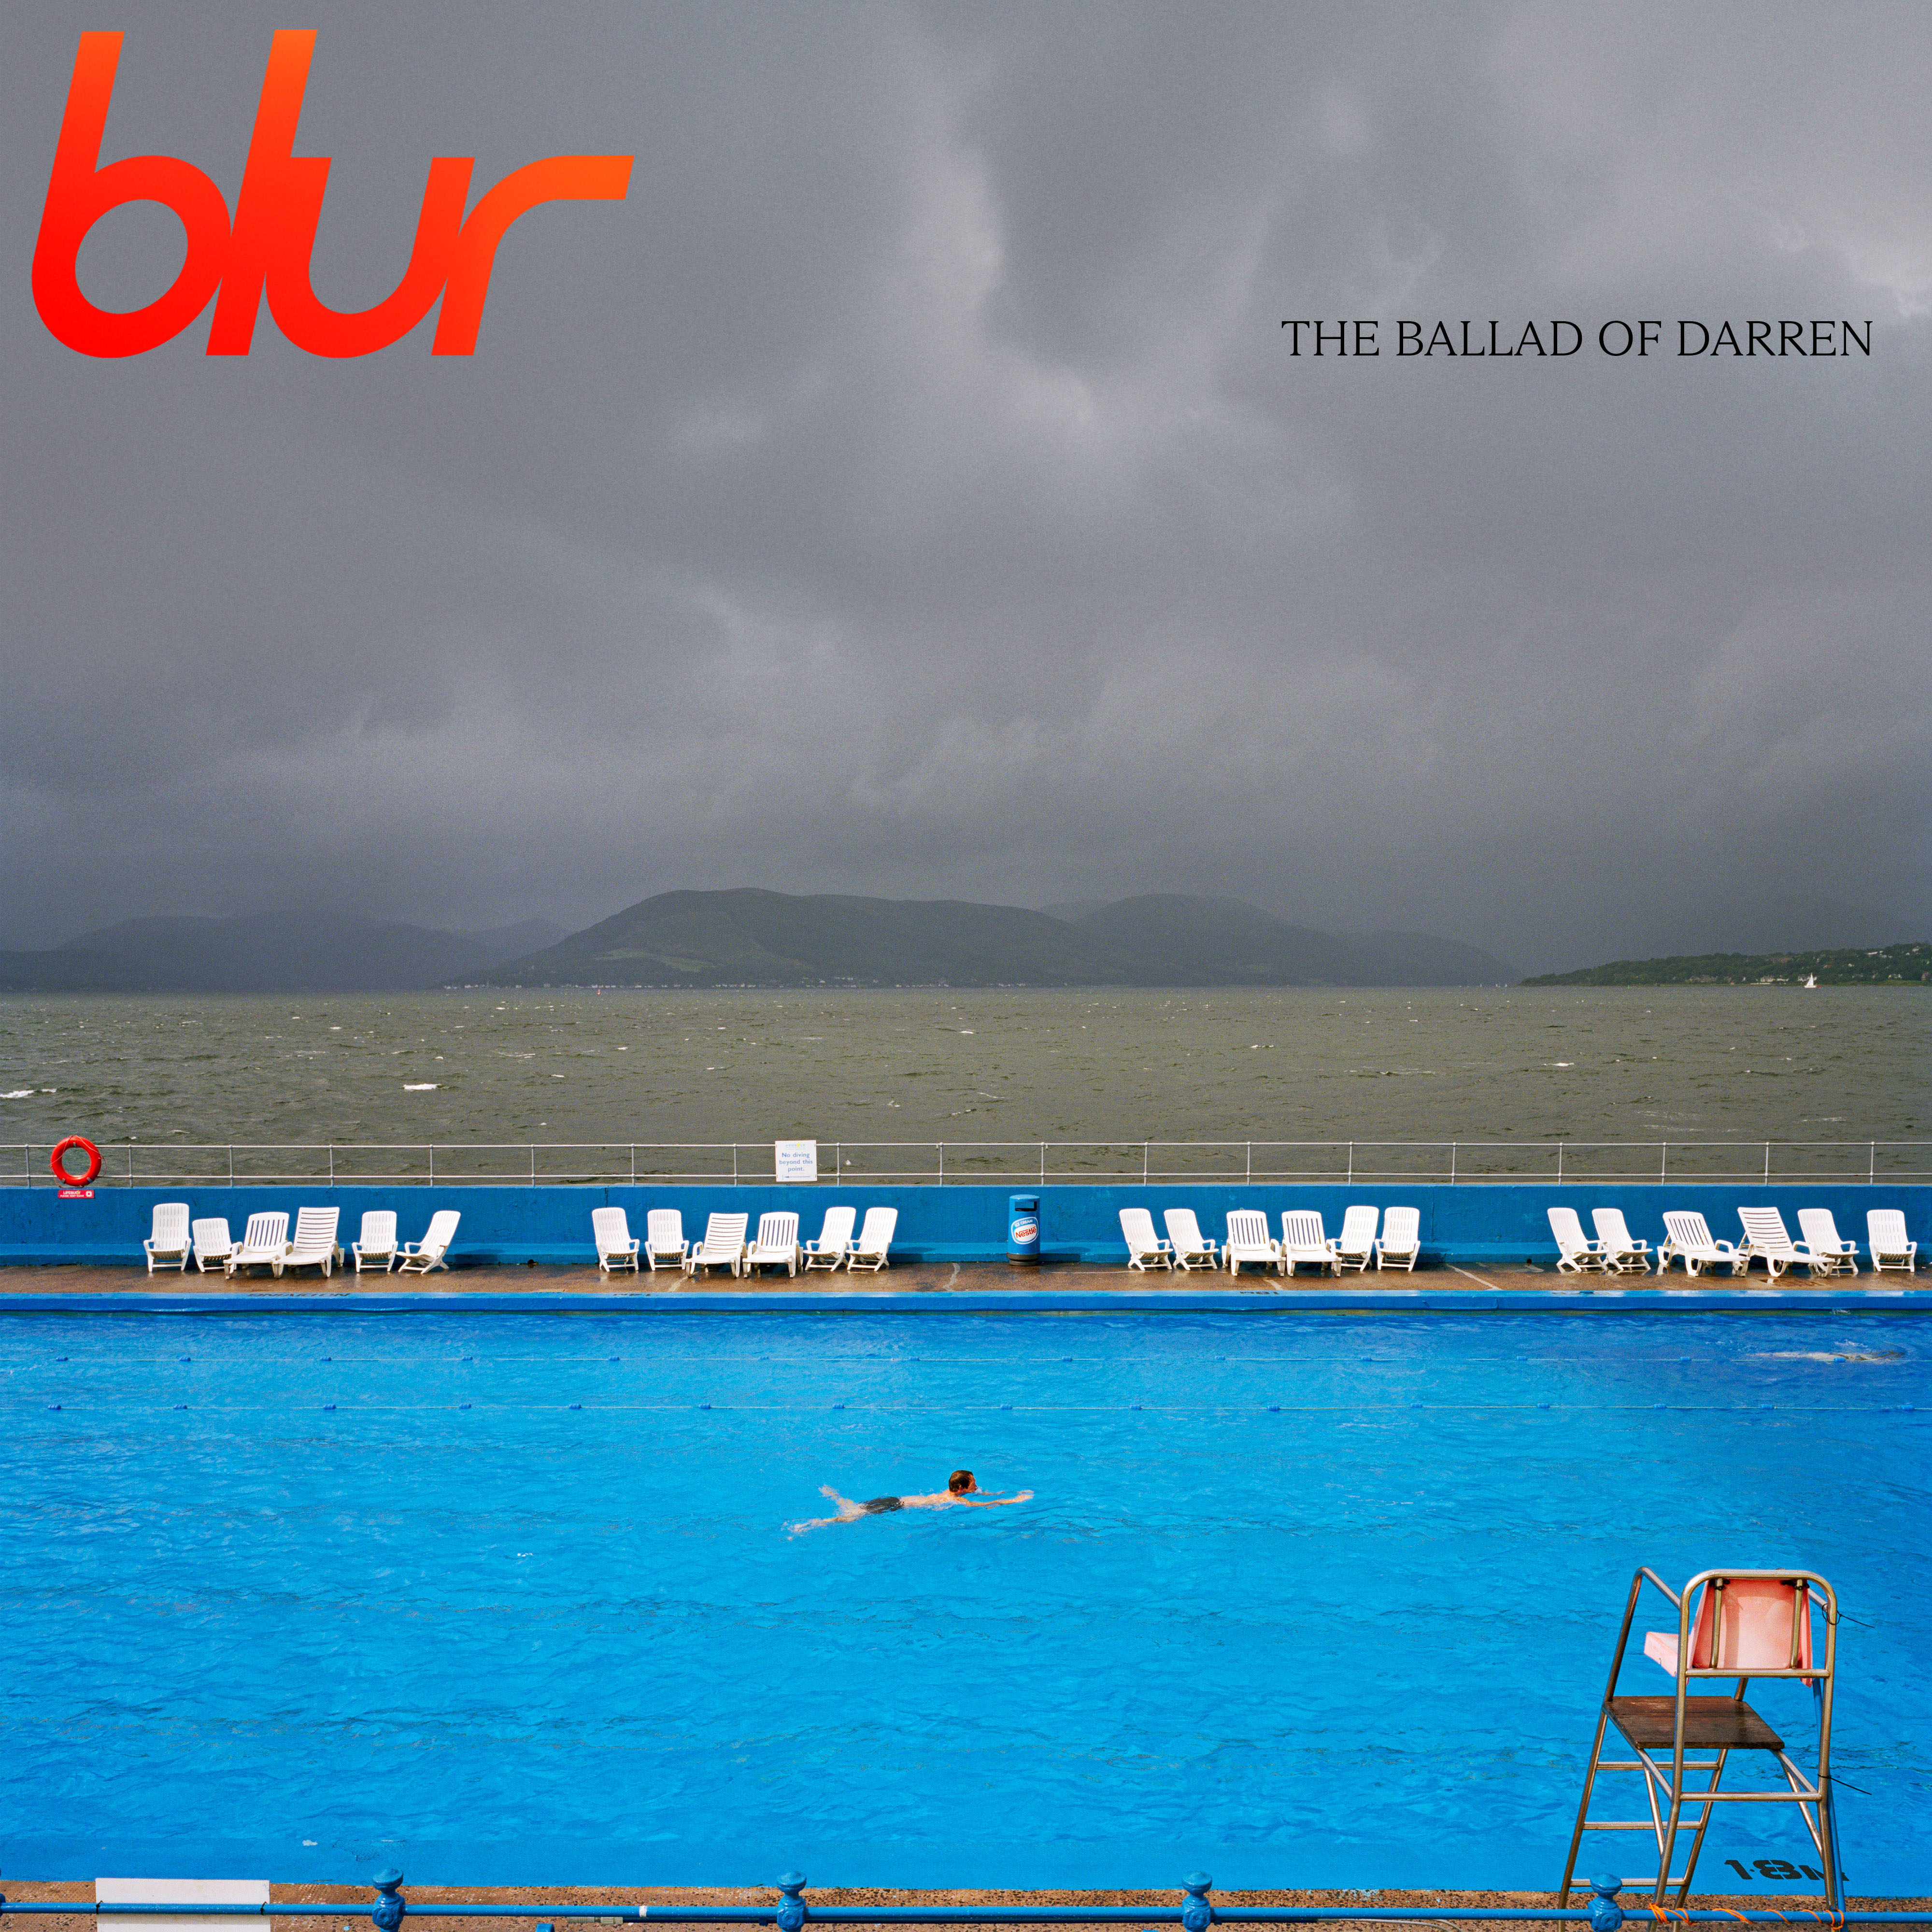 Blur's new album, The Ballad Of Darren is out now